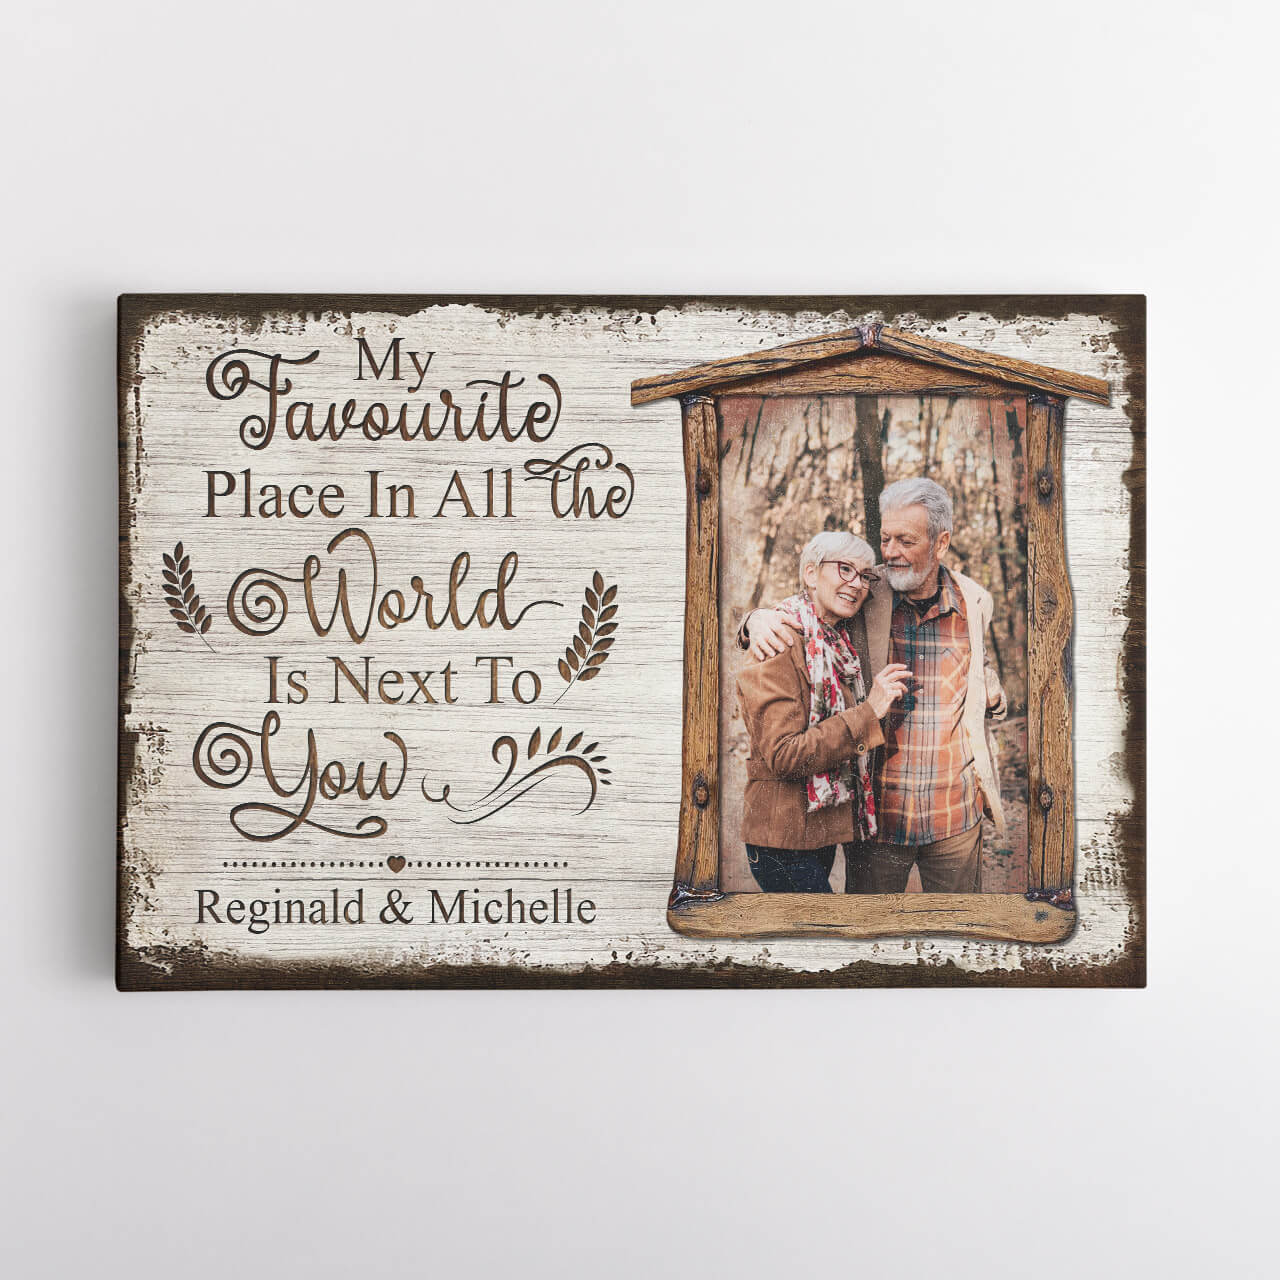 My Favorite Place in All The World is Next to You Canvas for Wife, Custom Loving Quote Canvas for Couple, Wedding Anniversary Canvas